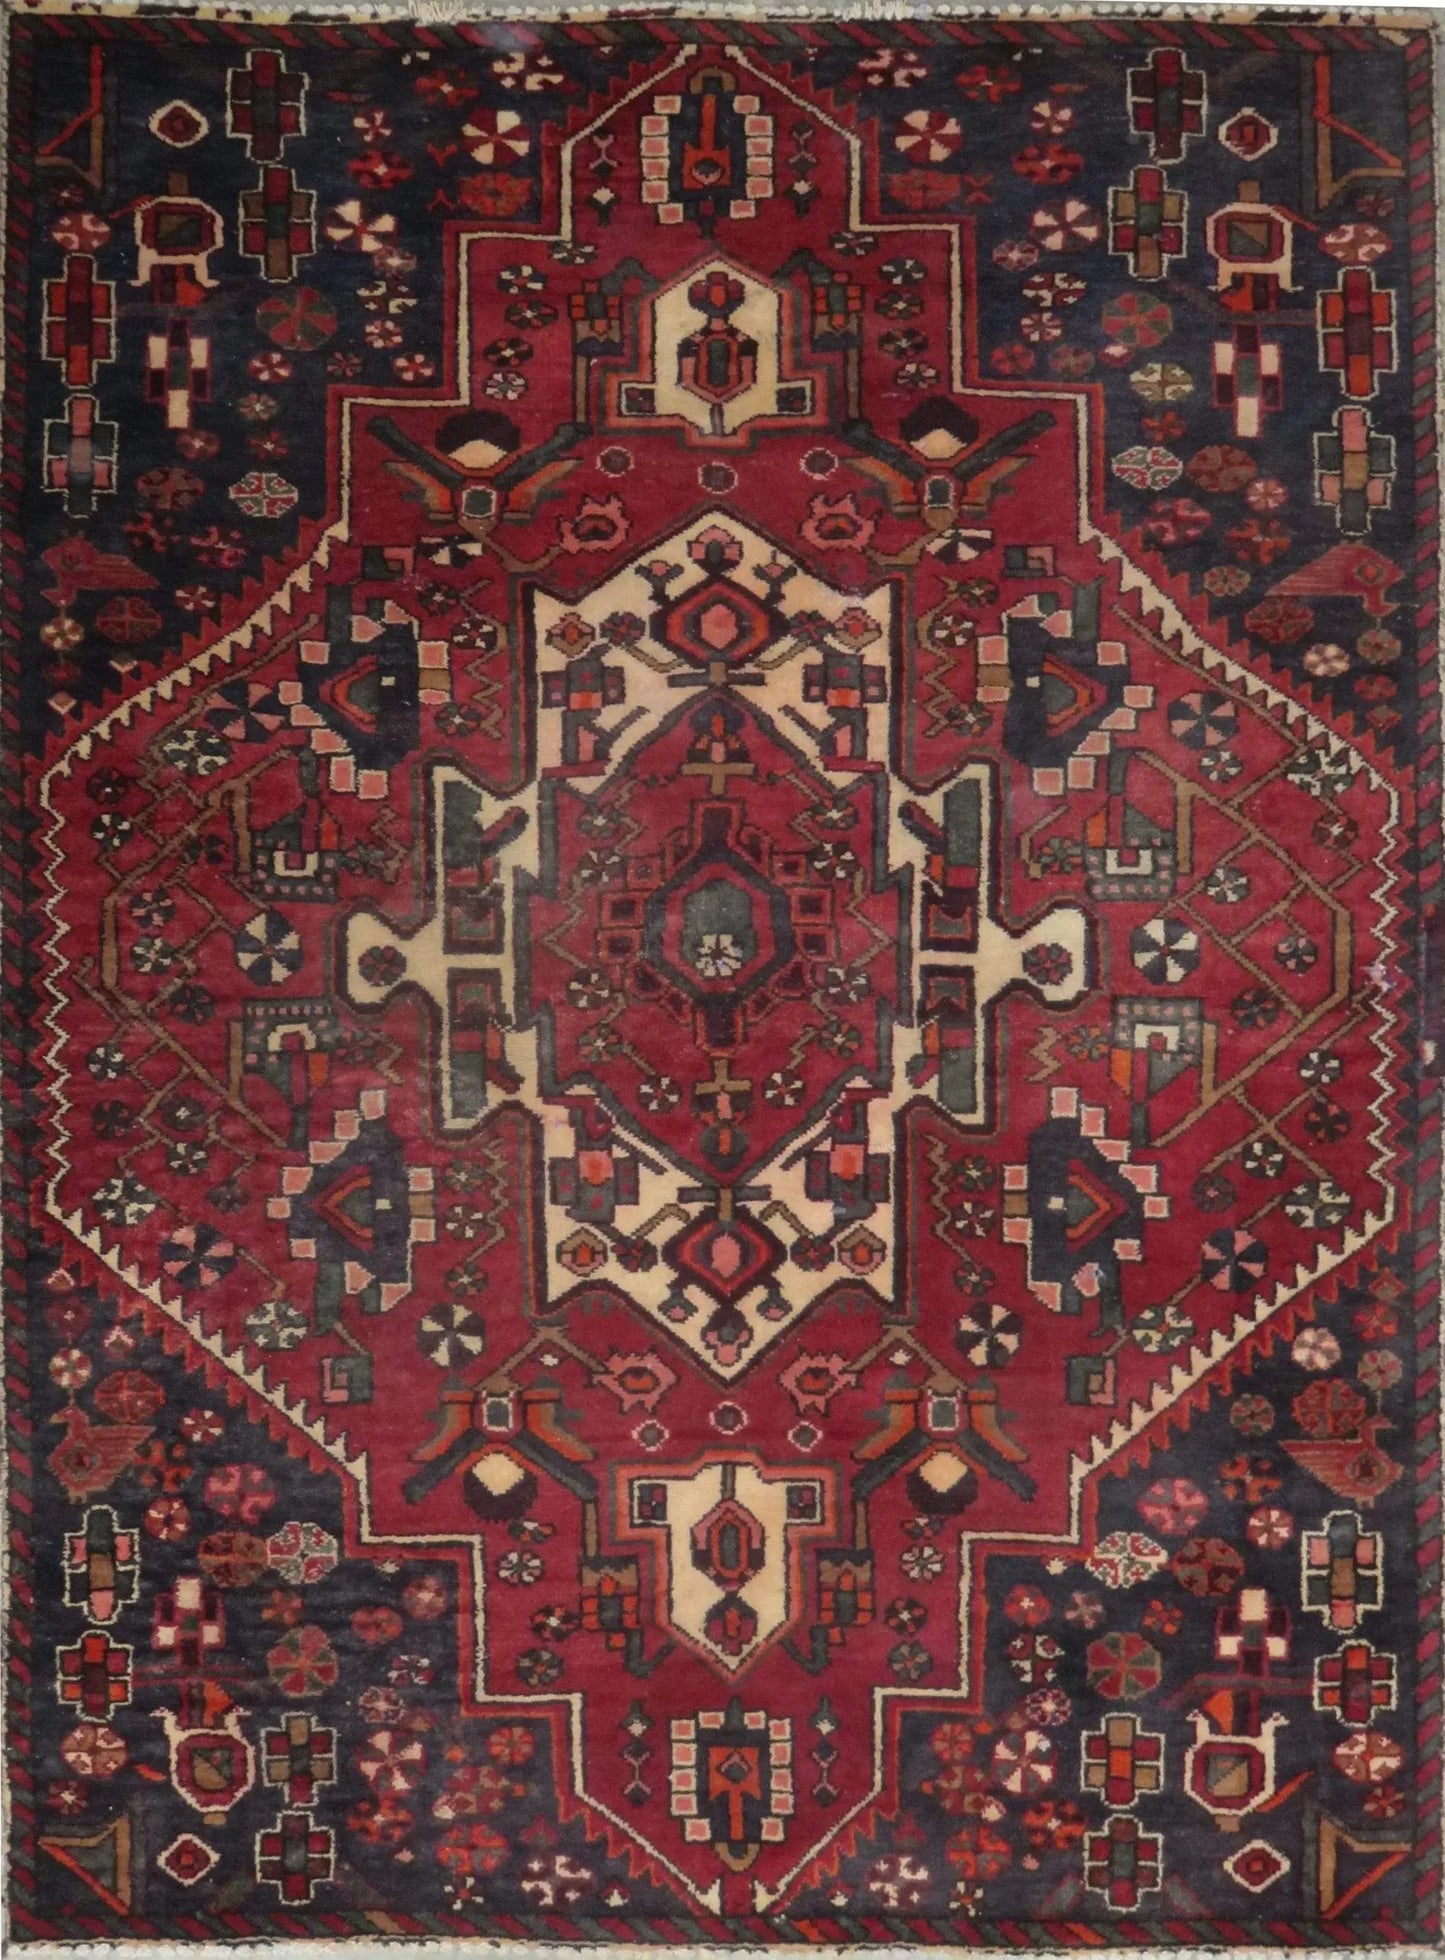 Hand-Knotted Vintage Rug 5'9" x 4'4"